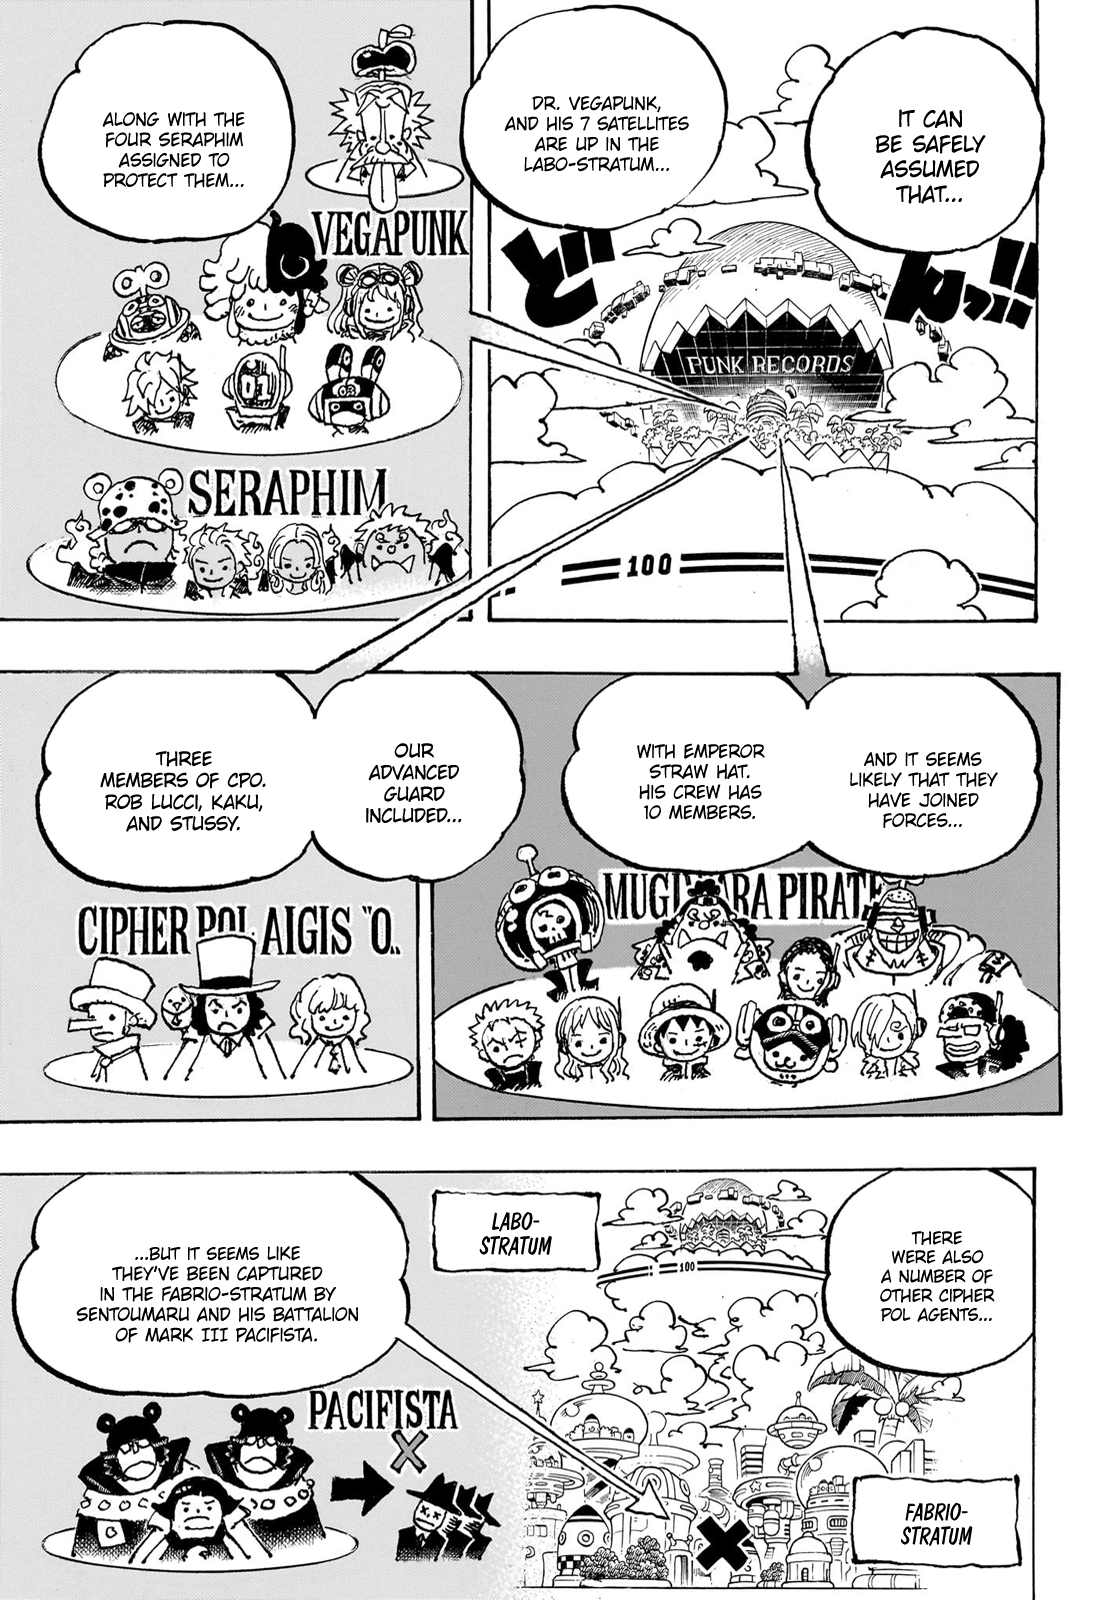 One Piece Chapter 1089, TCB Scans in 2023